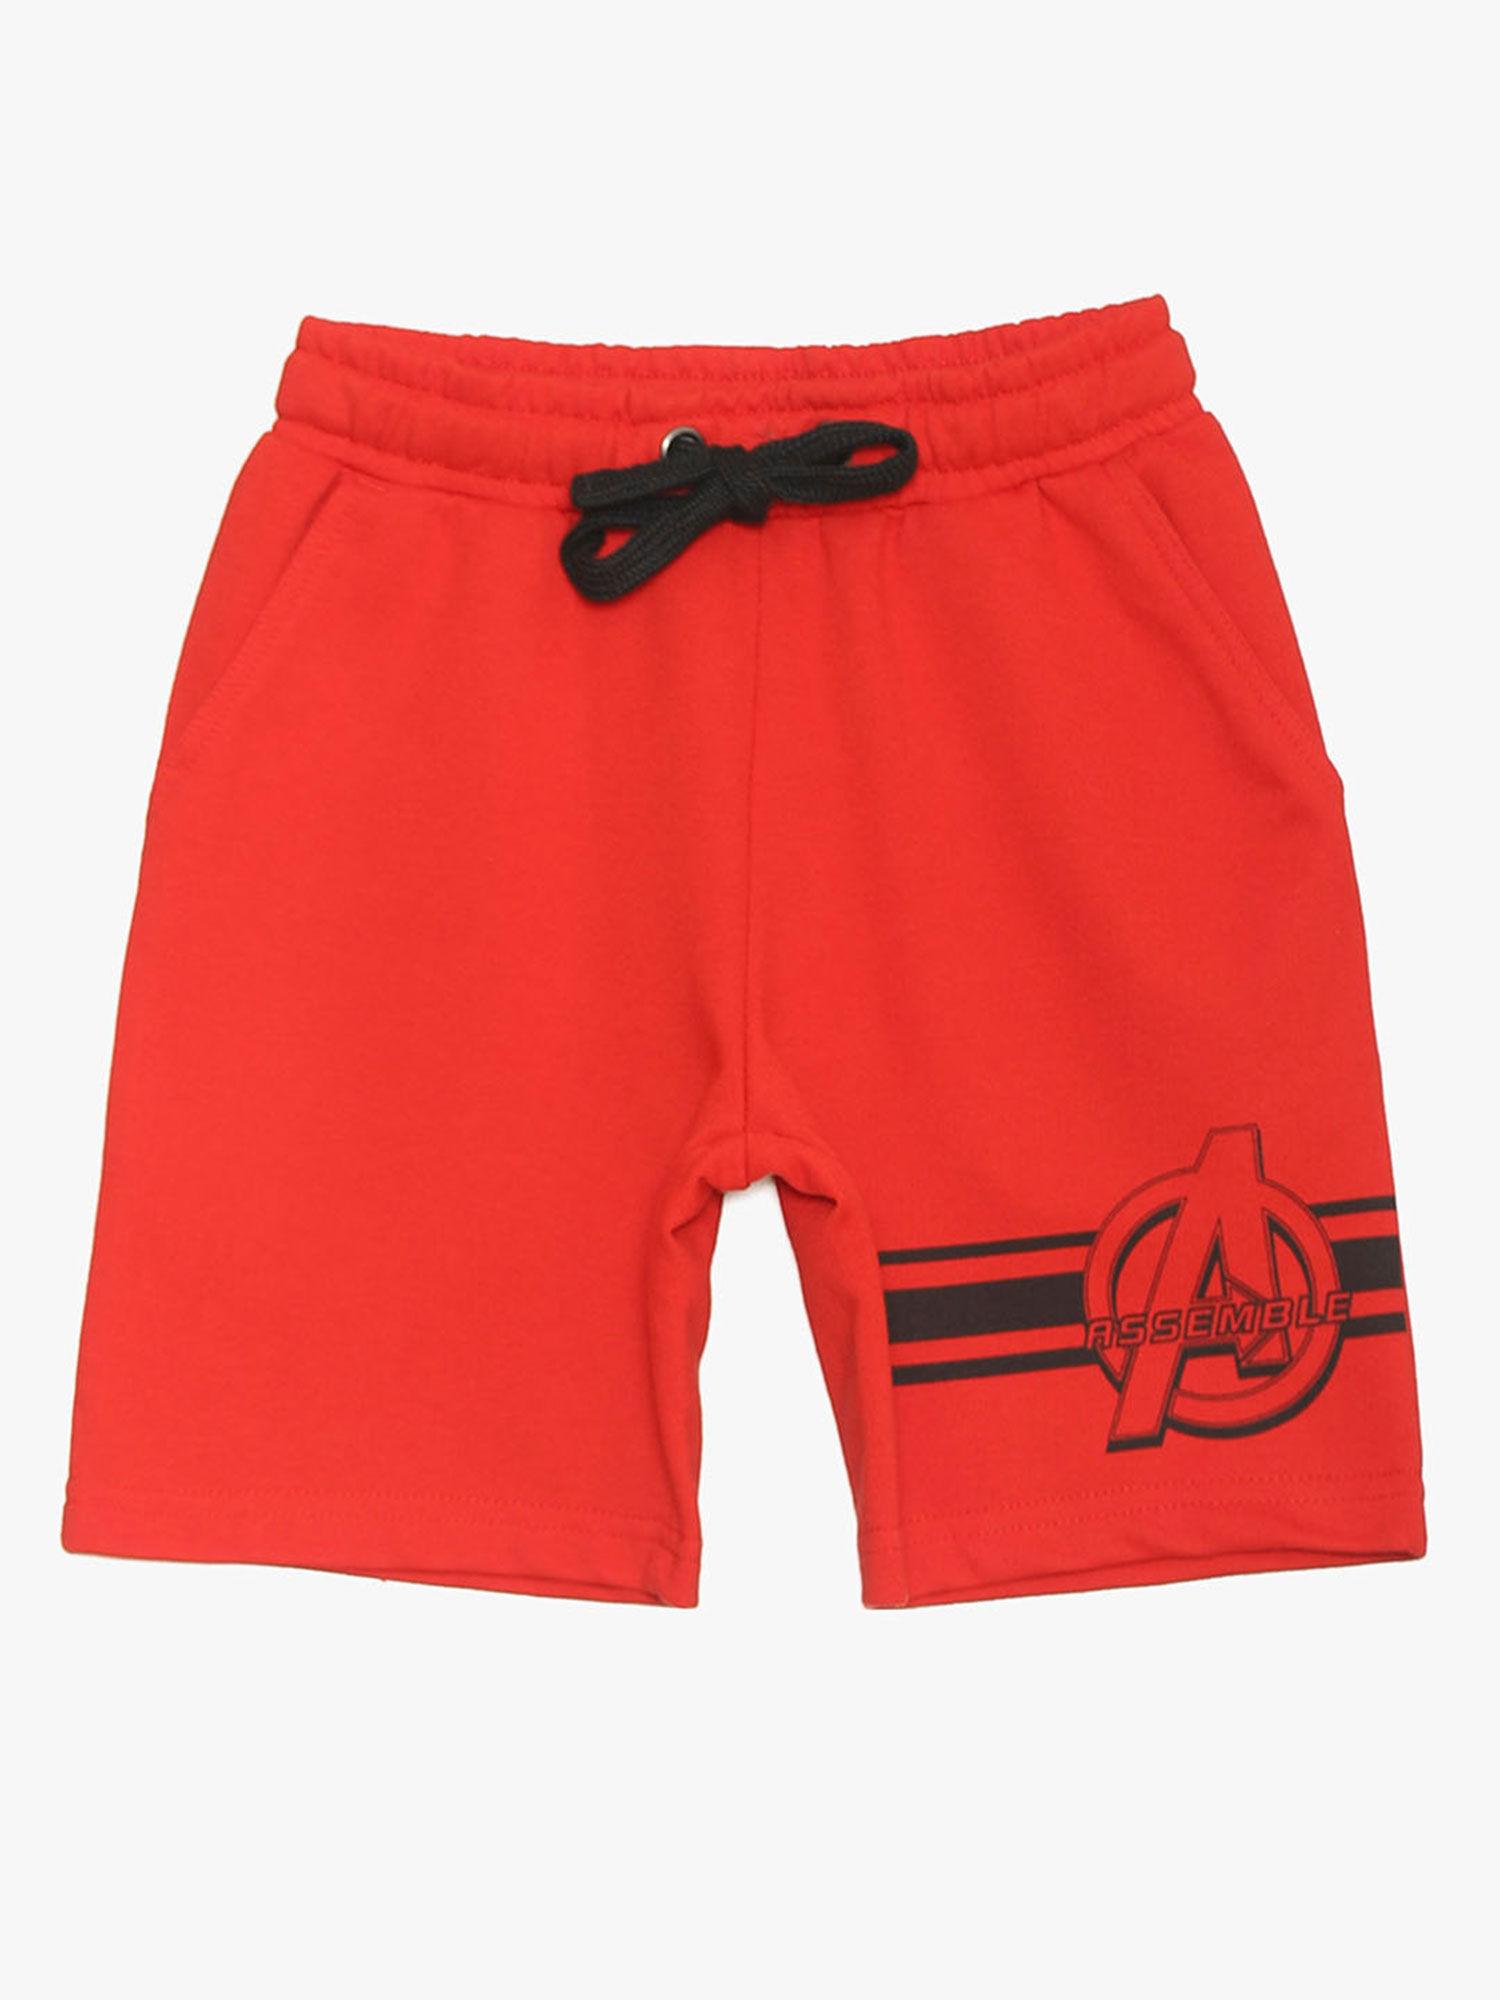 avengers red shorts